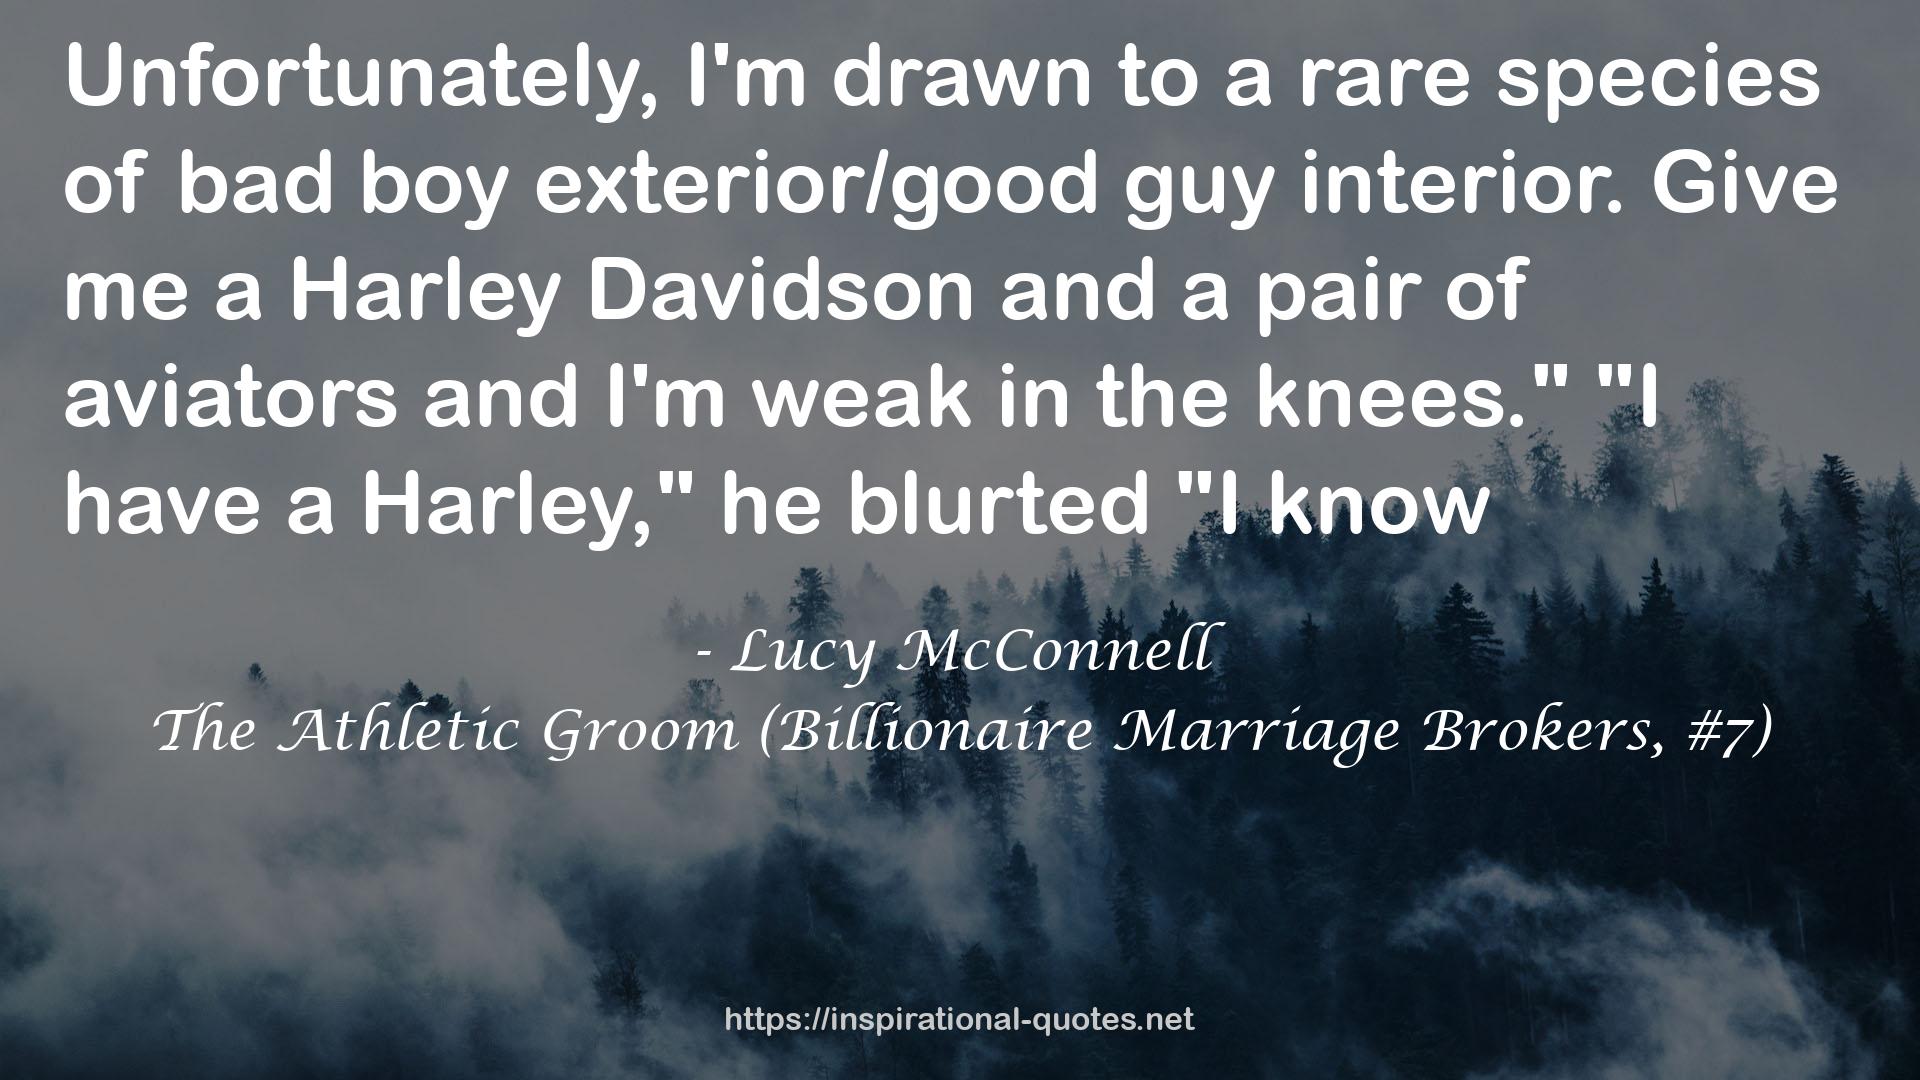 The Athletic Groom (Billionaire Marriage Brokers, #7) QUOTES